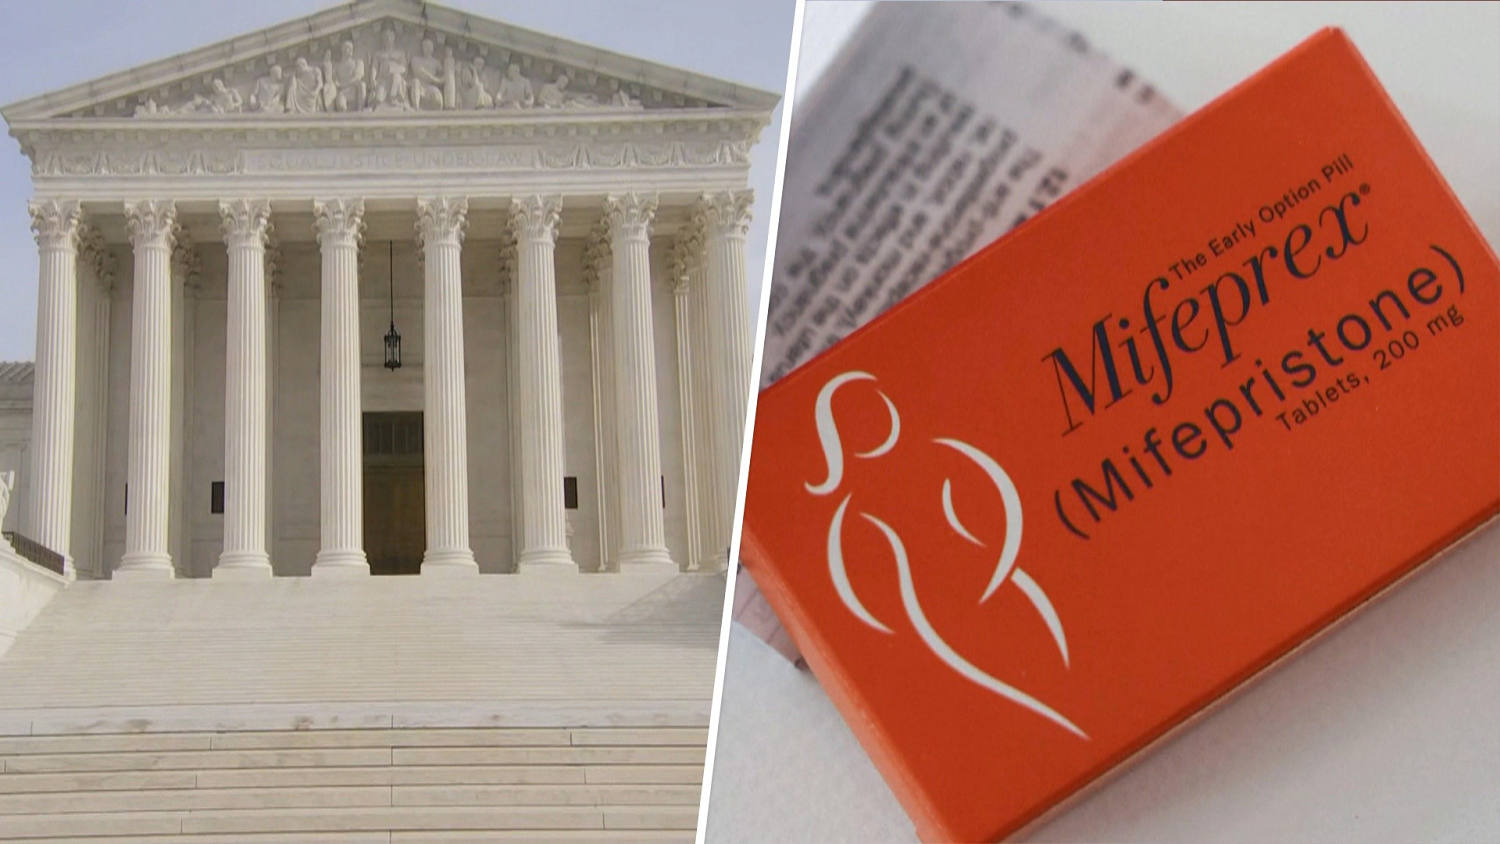 Supreme Court to hear oral arguments on abortion pill access